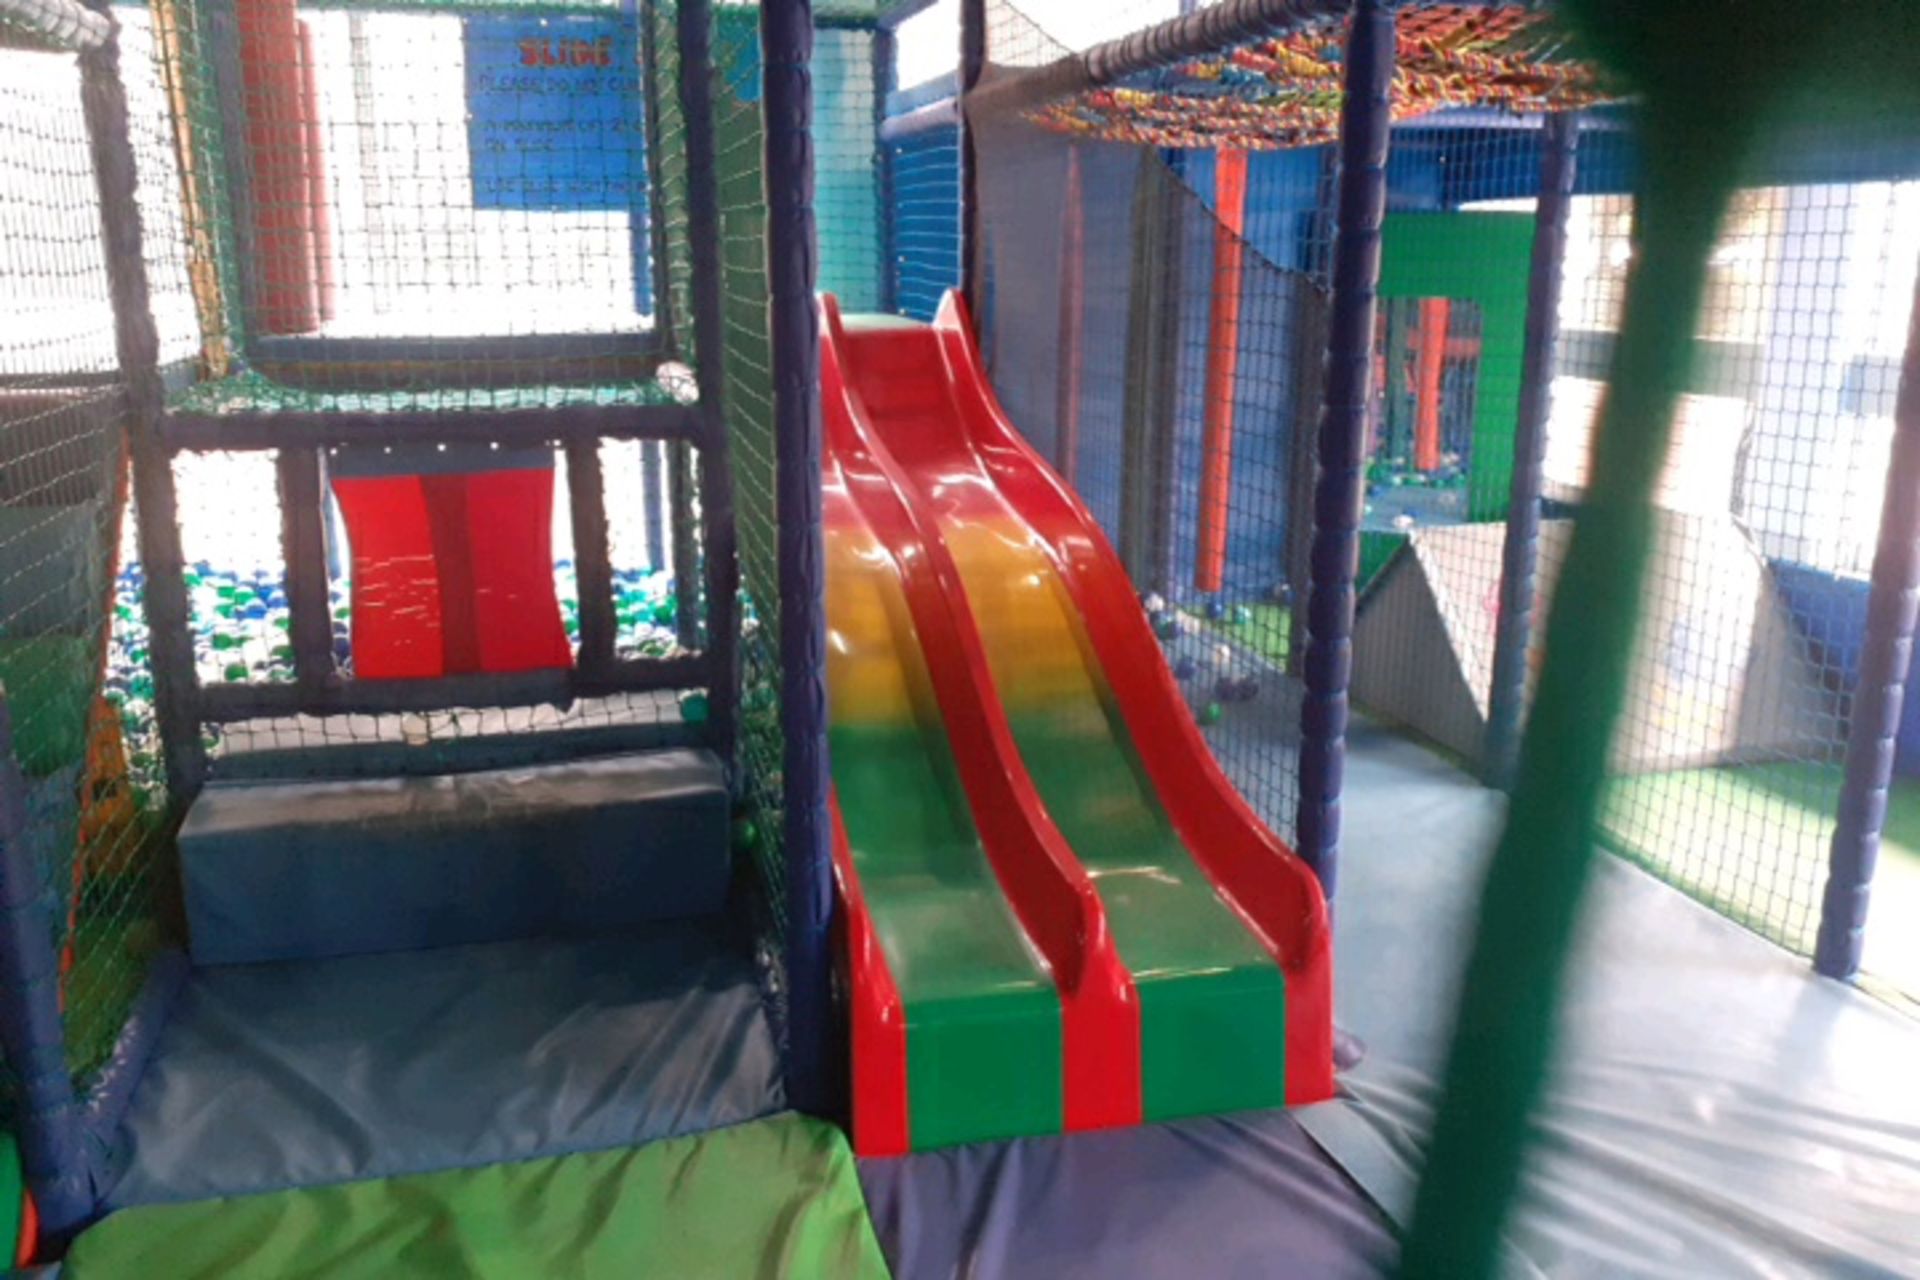 Adventure Reef 2 storey Soft play Facility - Image 6 of 17